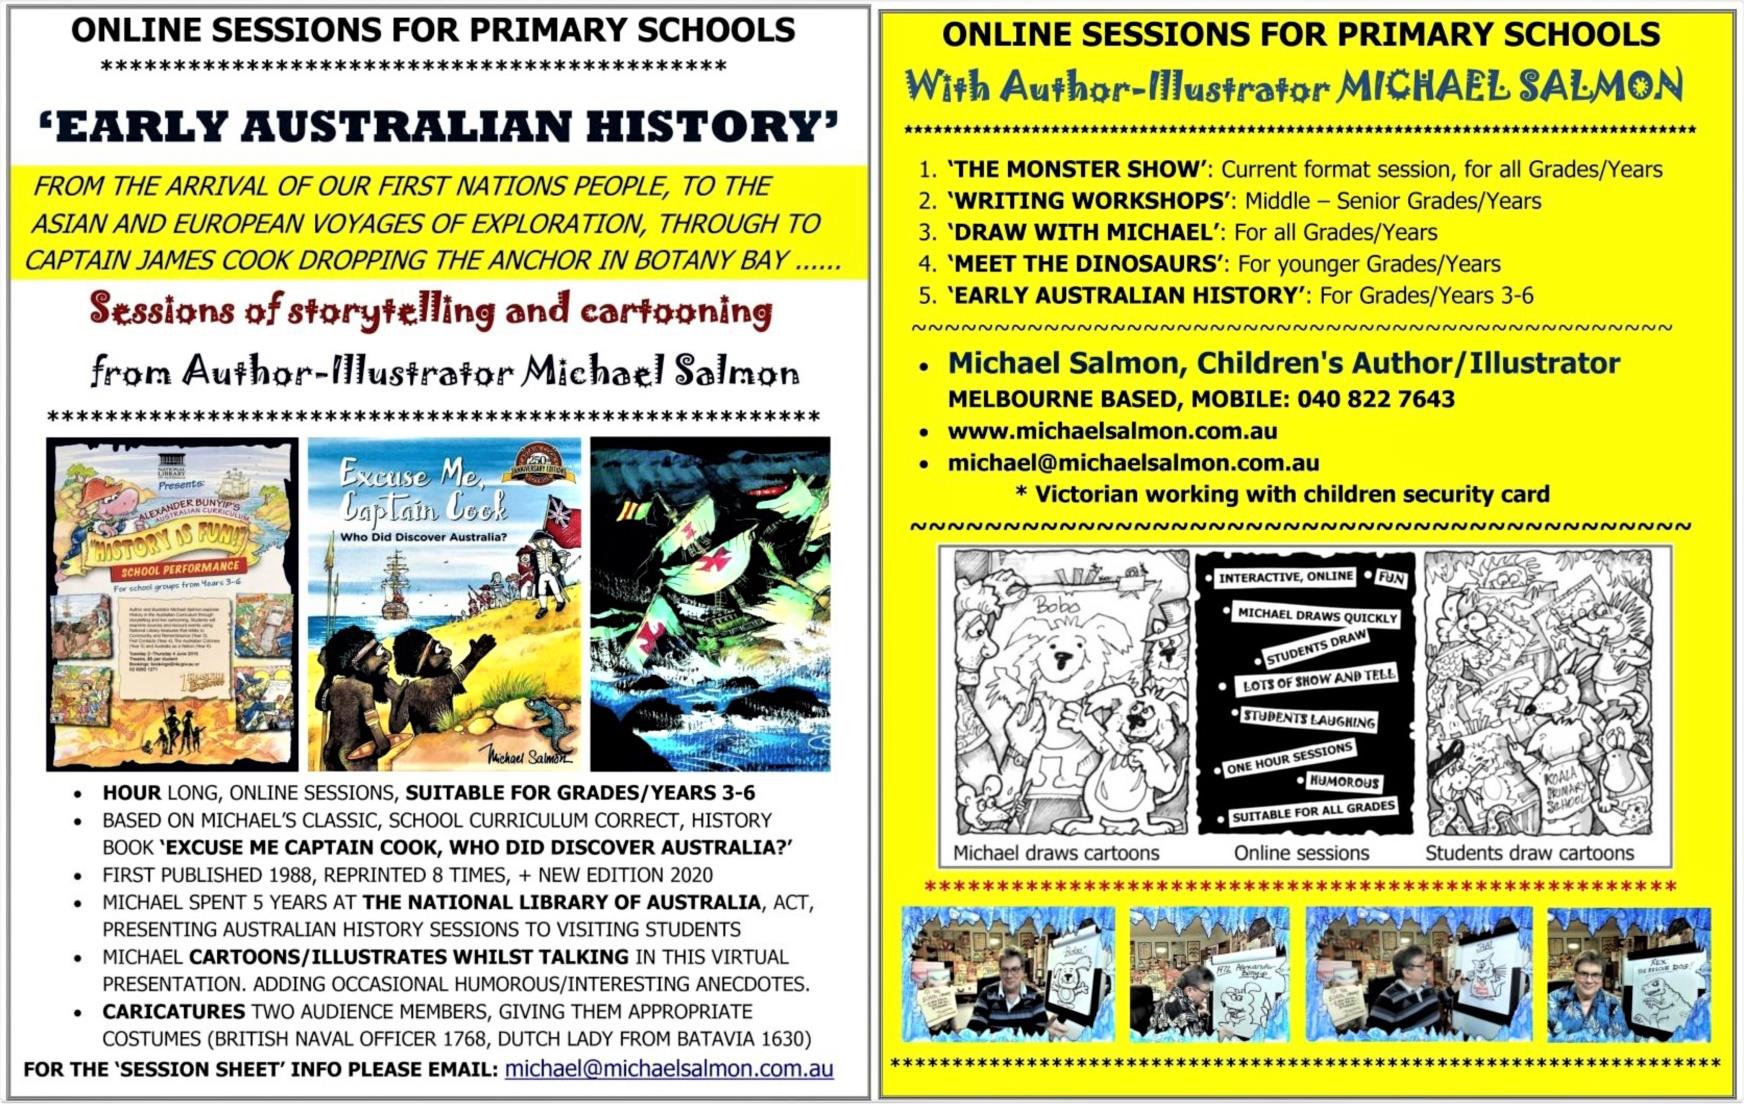 NEW 2021 AUTHOR SESSIONS WORKSHOPS Page 2 Image 0001